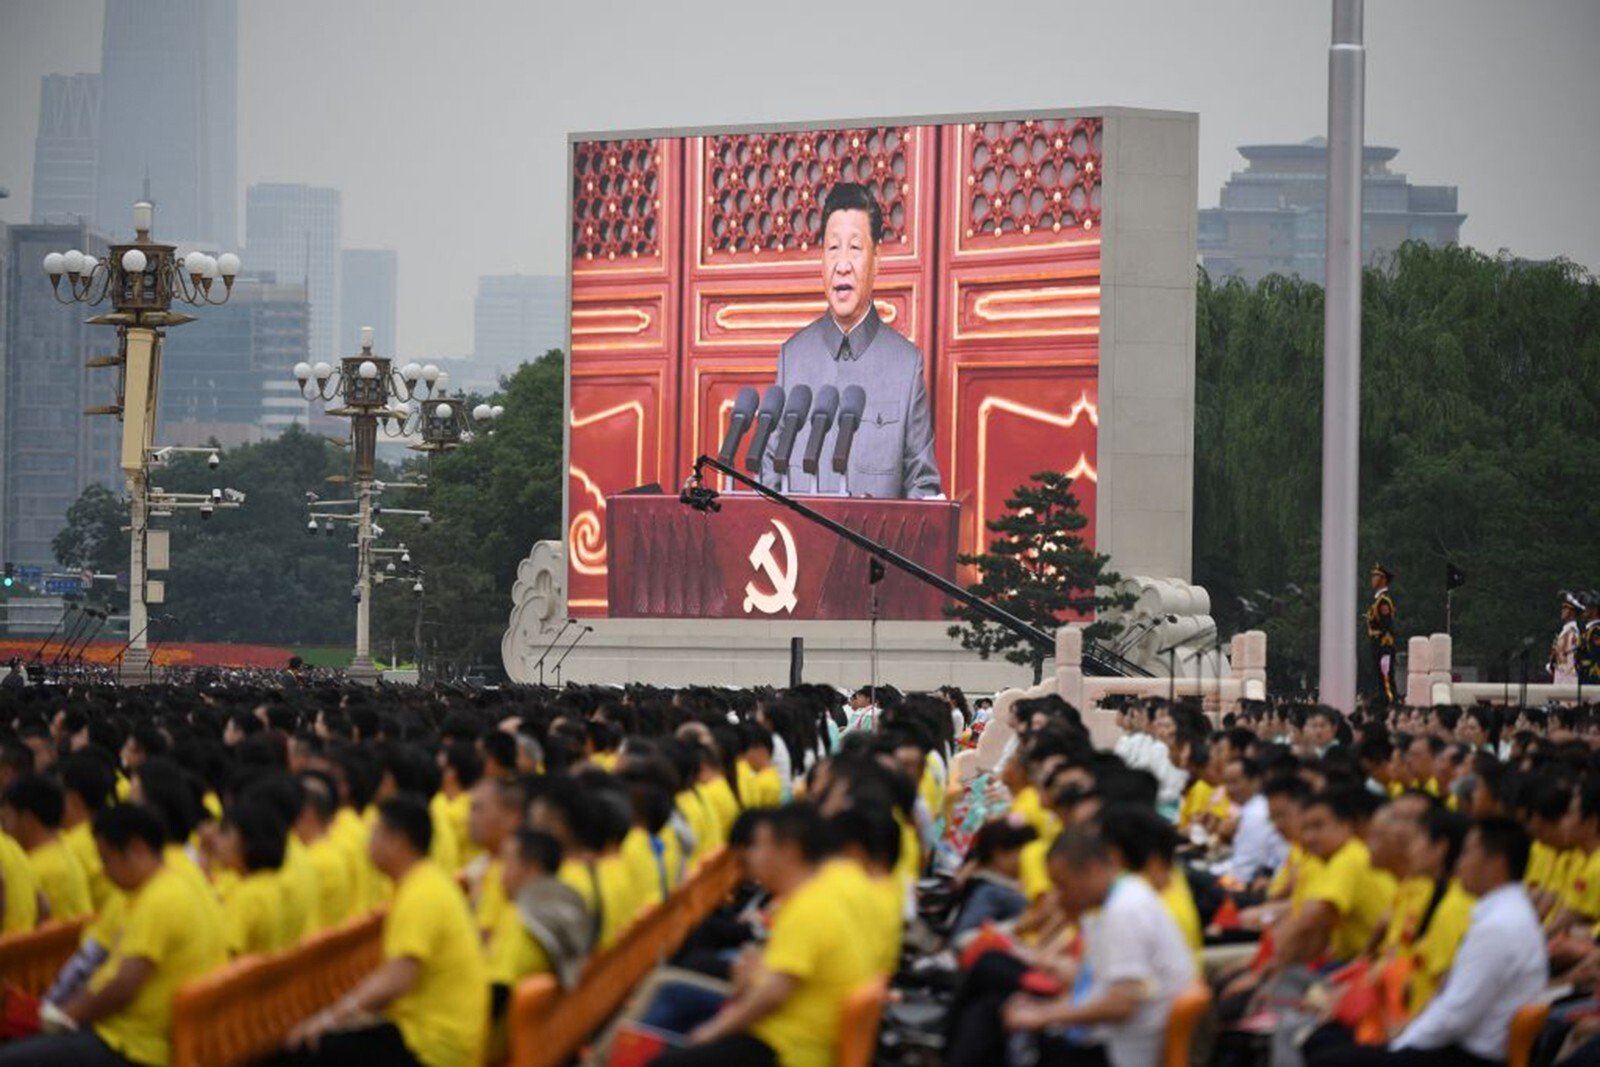 Chinese President Xi Jinping pictured on a screen in Tiananmen Square as he delivers his speech to mark the party’s centenary. Photo: AFP/Getty Images